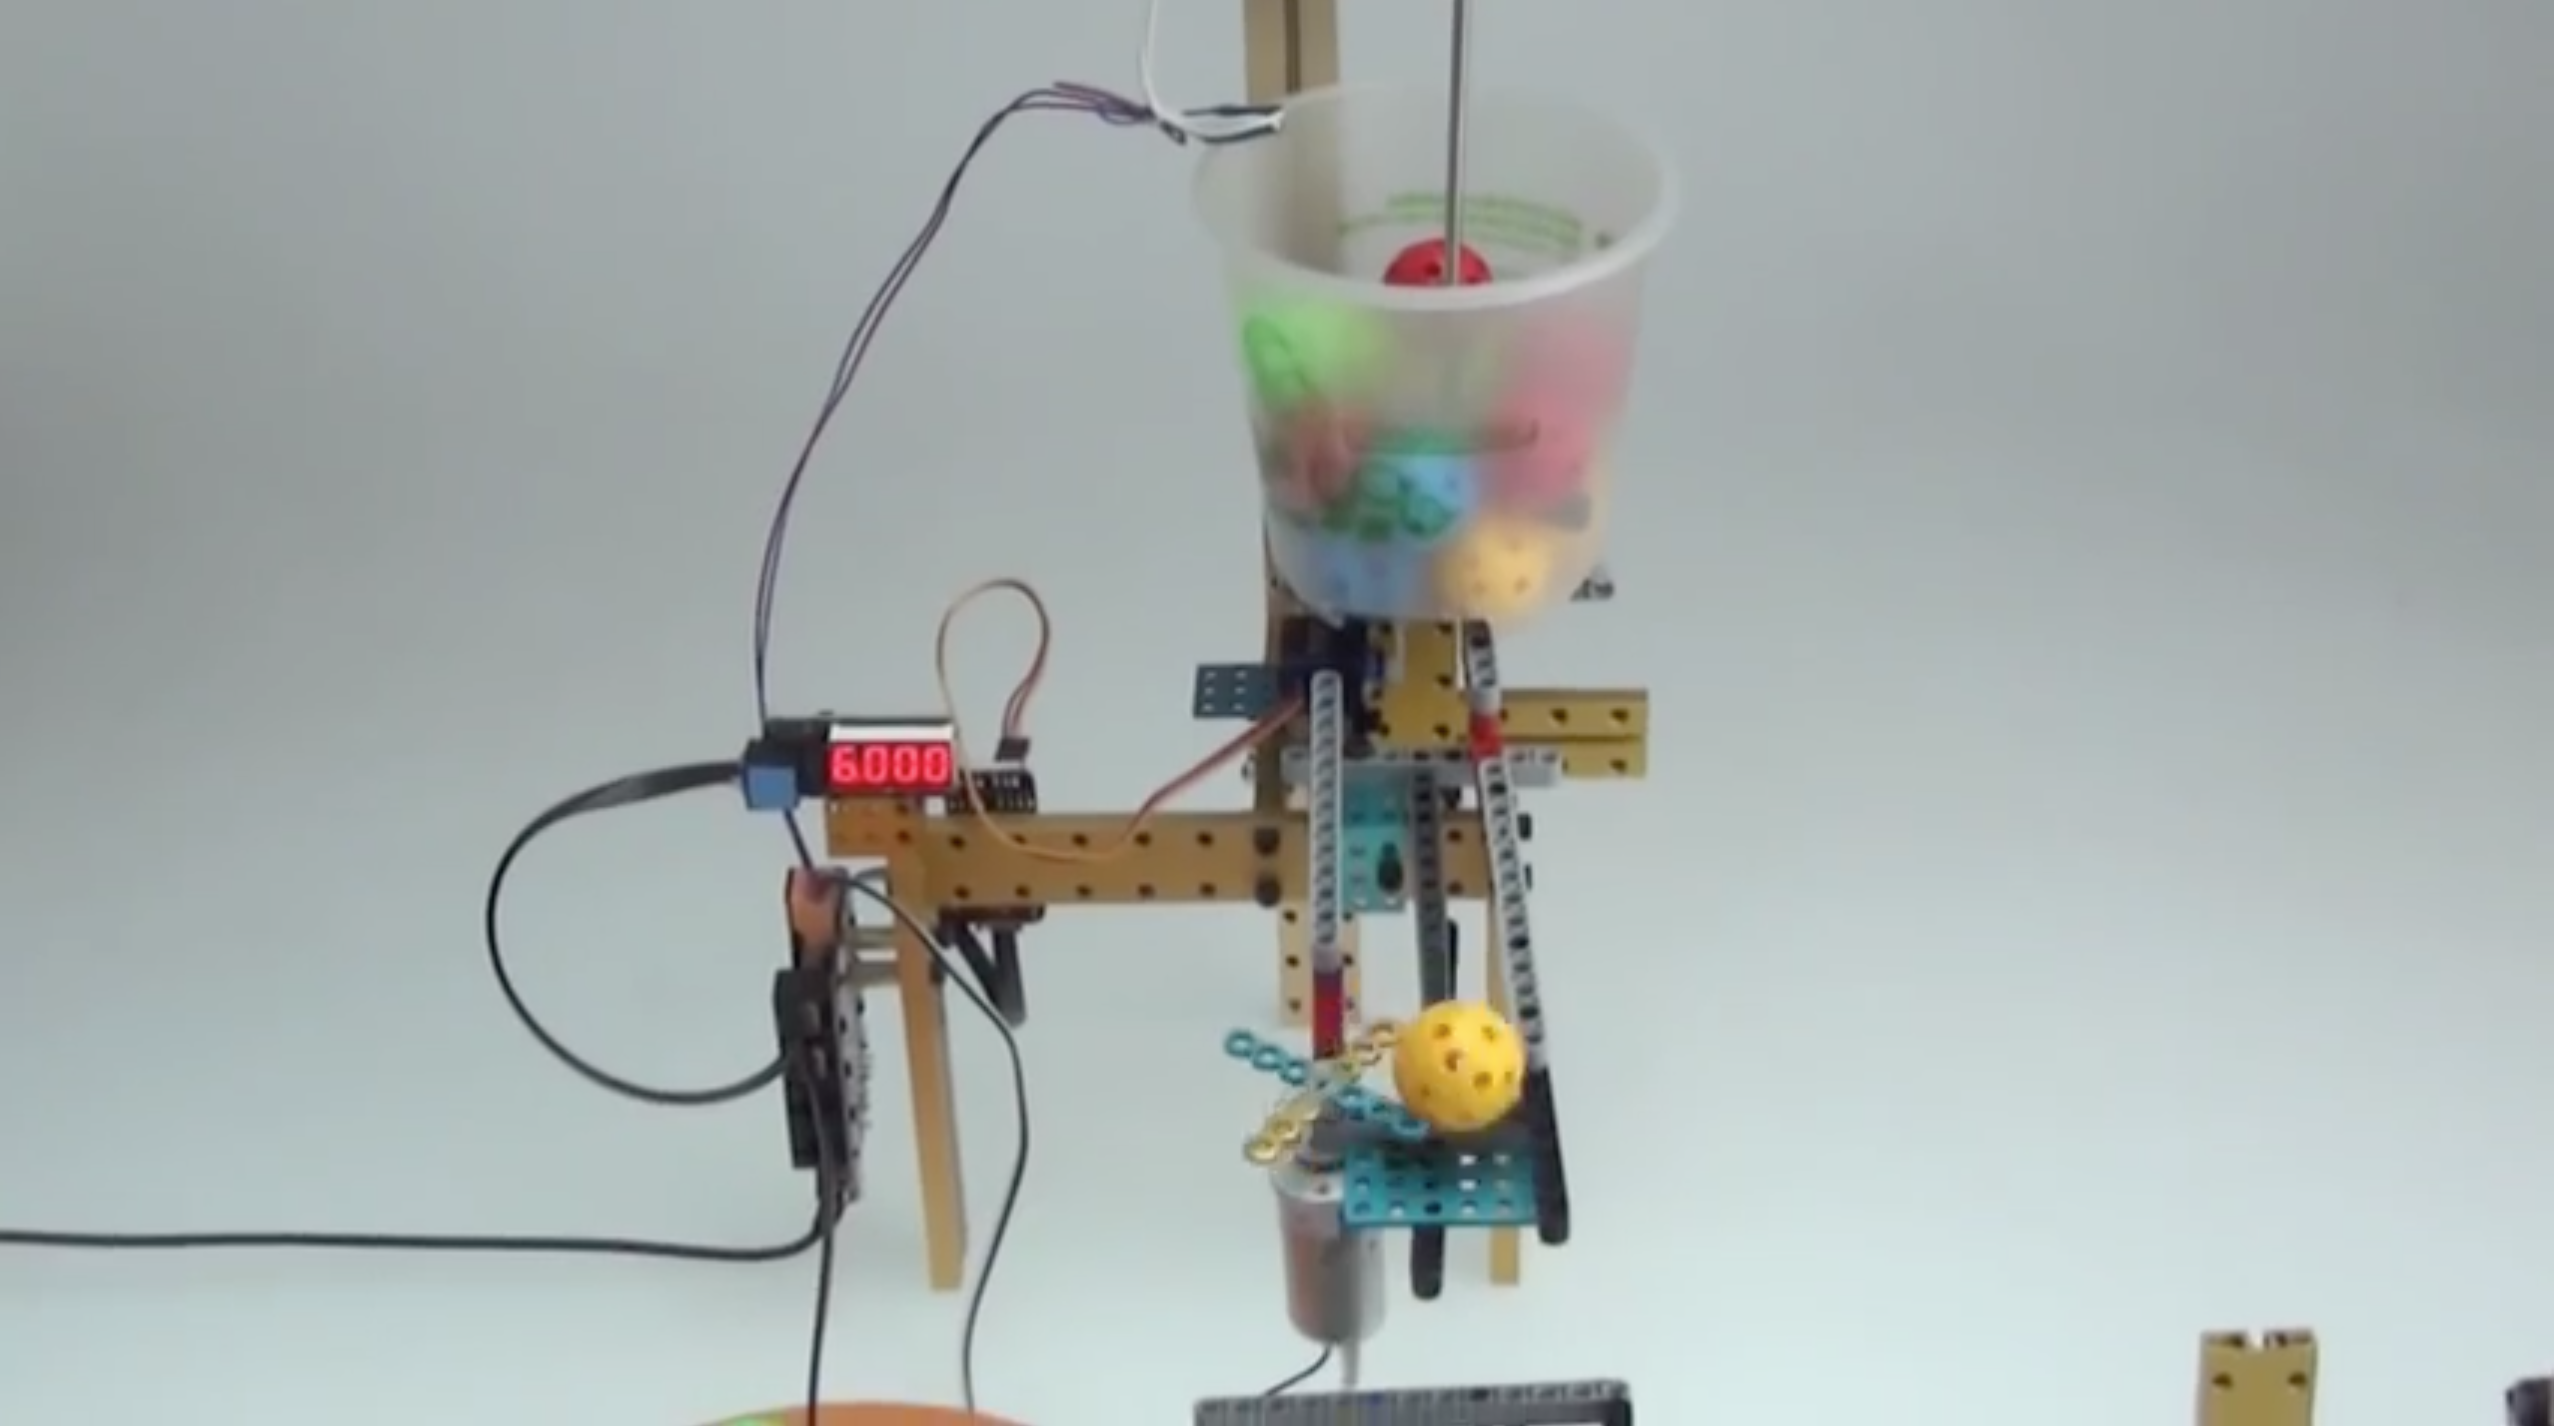 Build a Ball-Counting Robot Using Makeblock and Lego